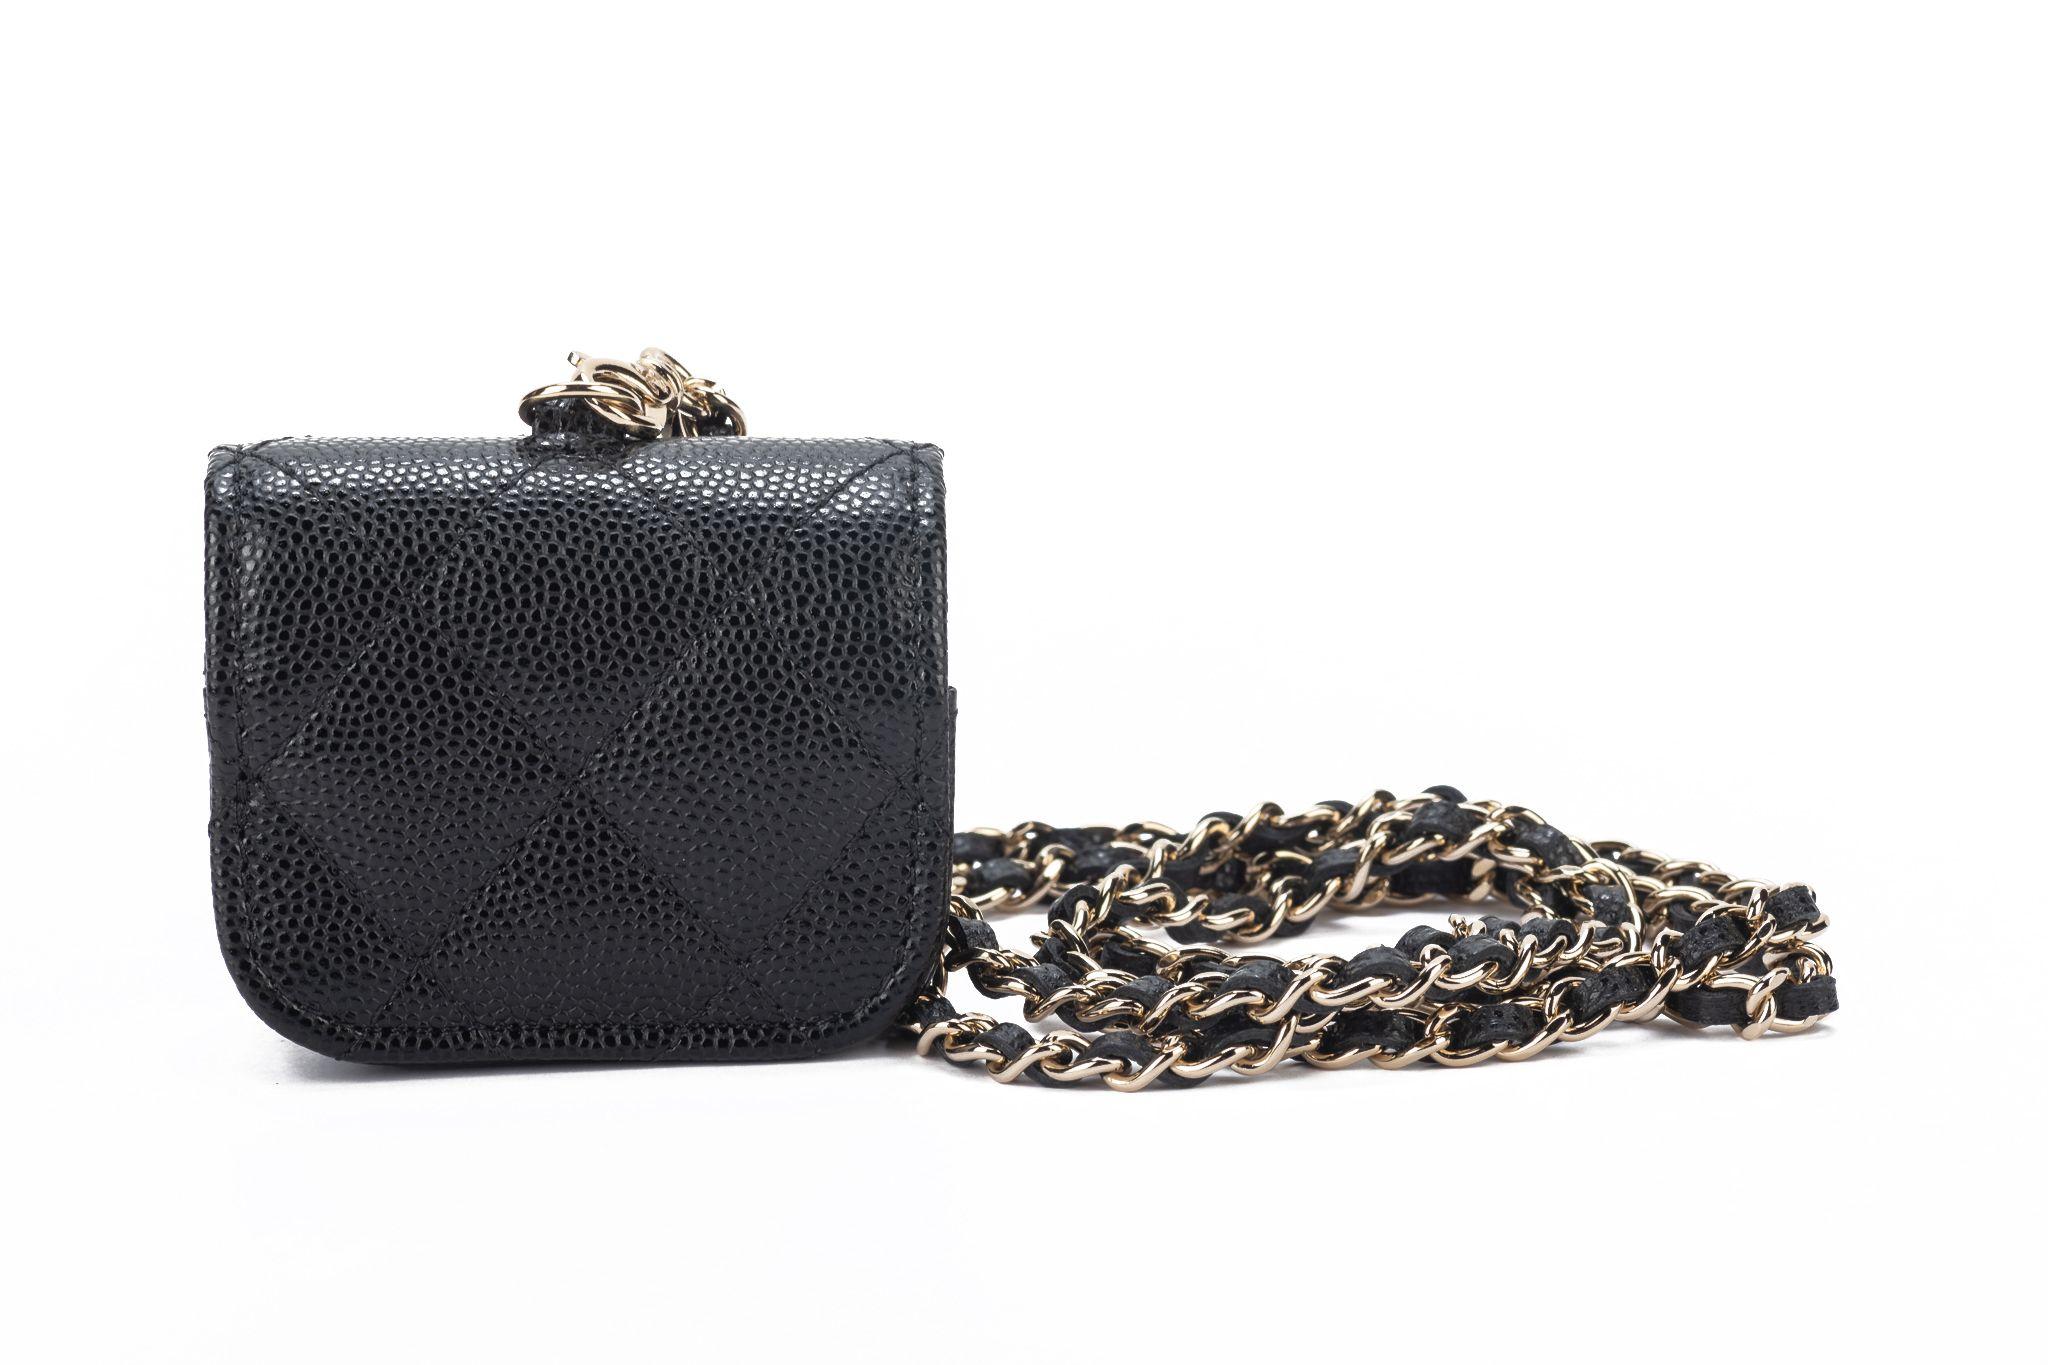 Chanel brand new in box black quilted caviar air pods case necklace/cross body. Chain drop 17”. Collection 31. Comes with hologram, id card, original dust cover and box .